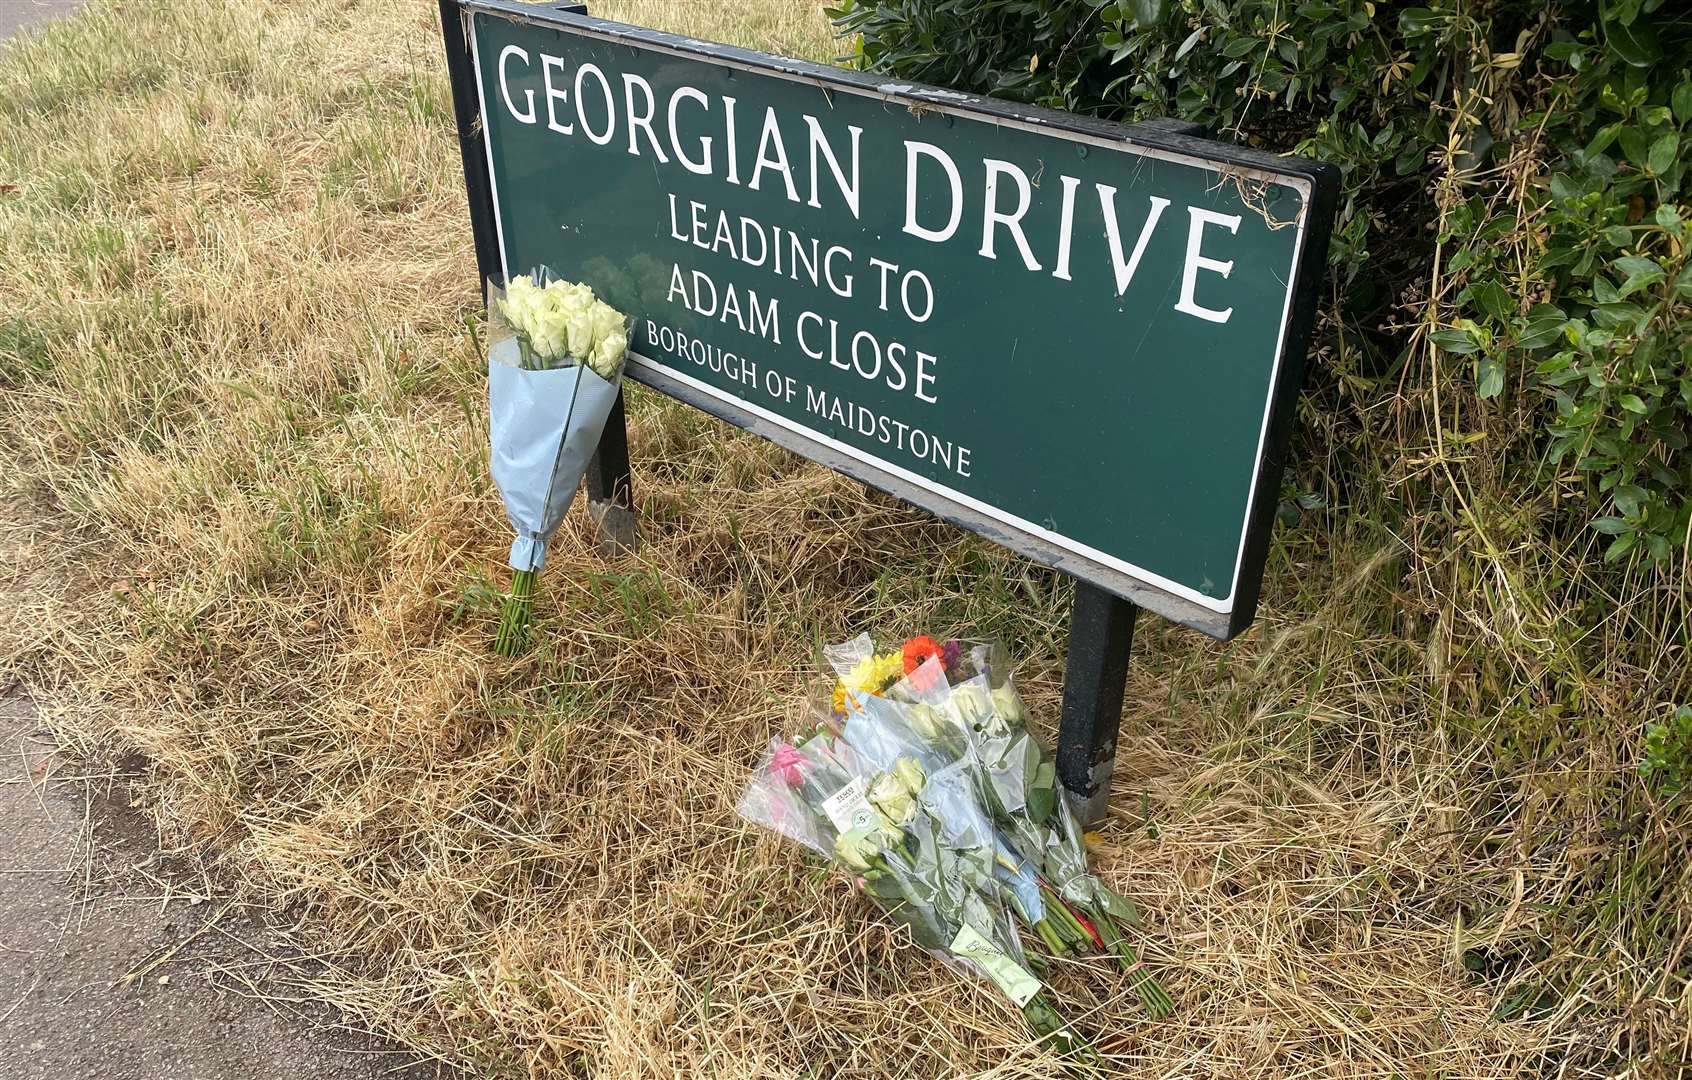 Flowers have been left at the roadside